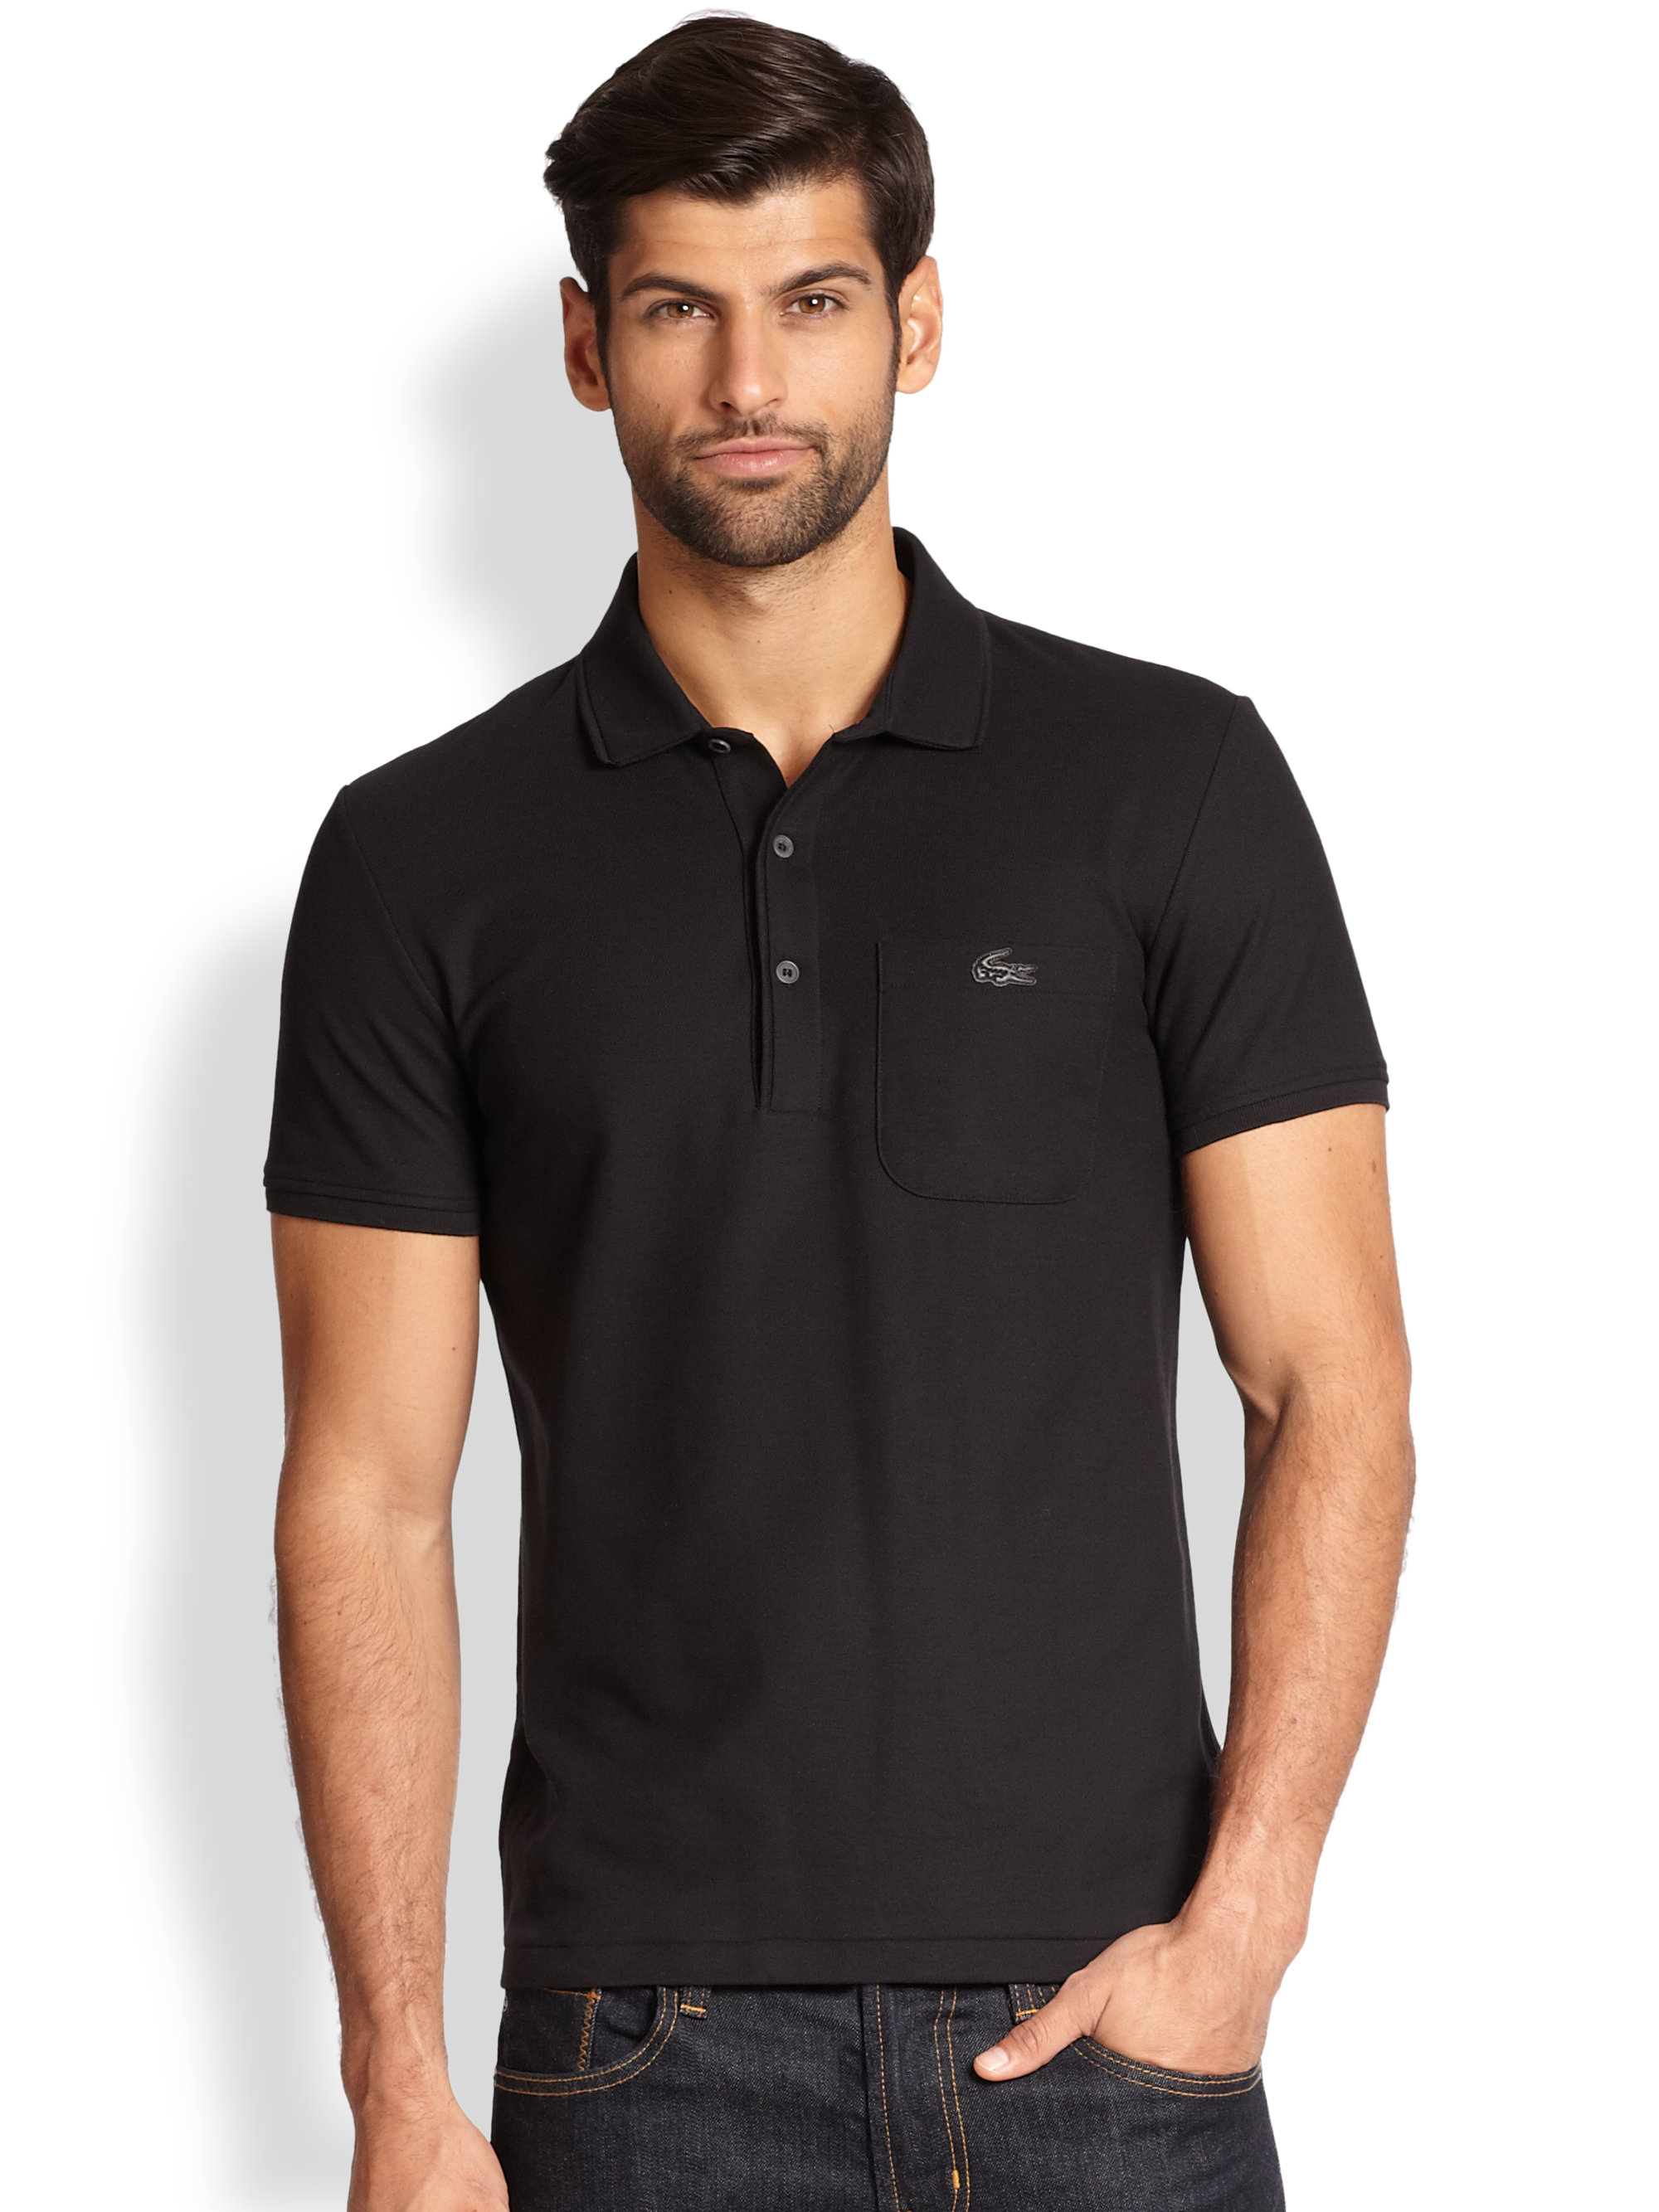 Lacoste Leather Croc Polo Shirt in 